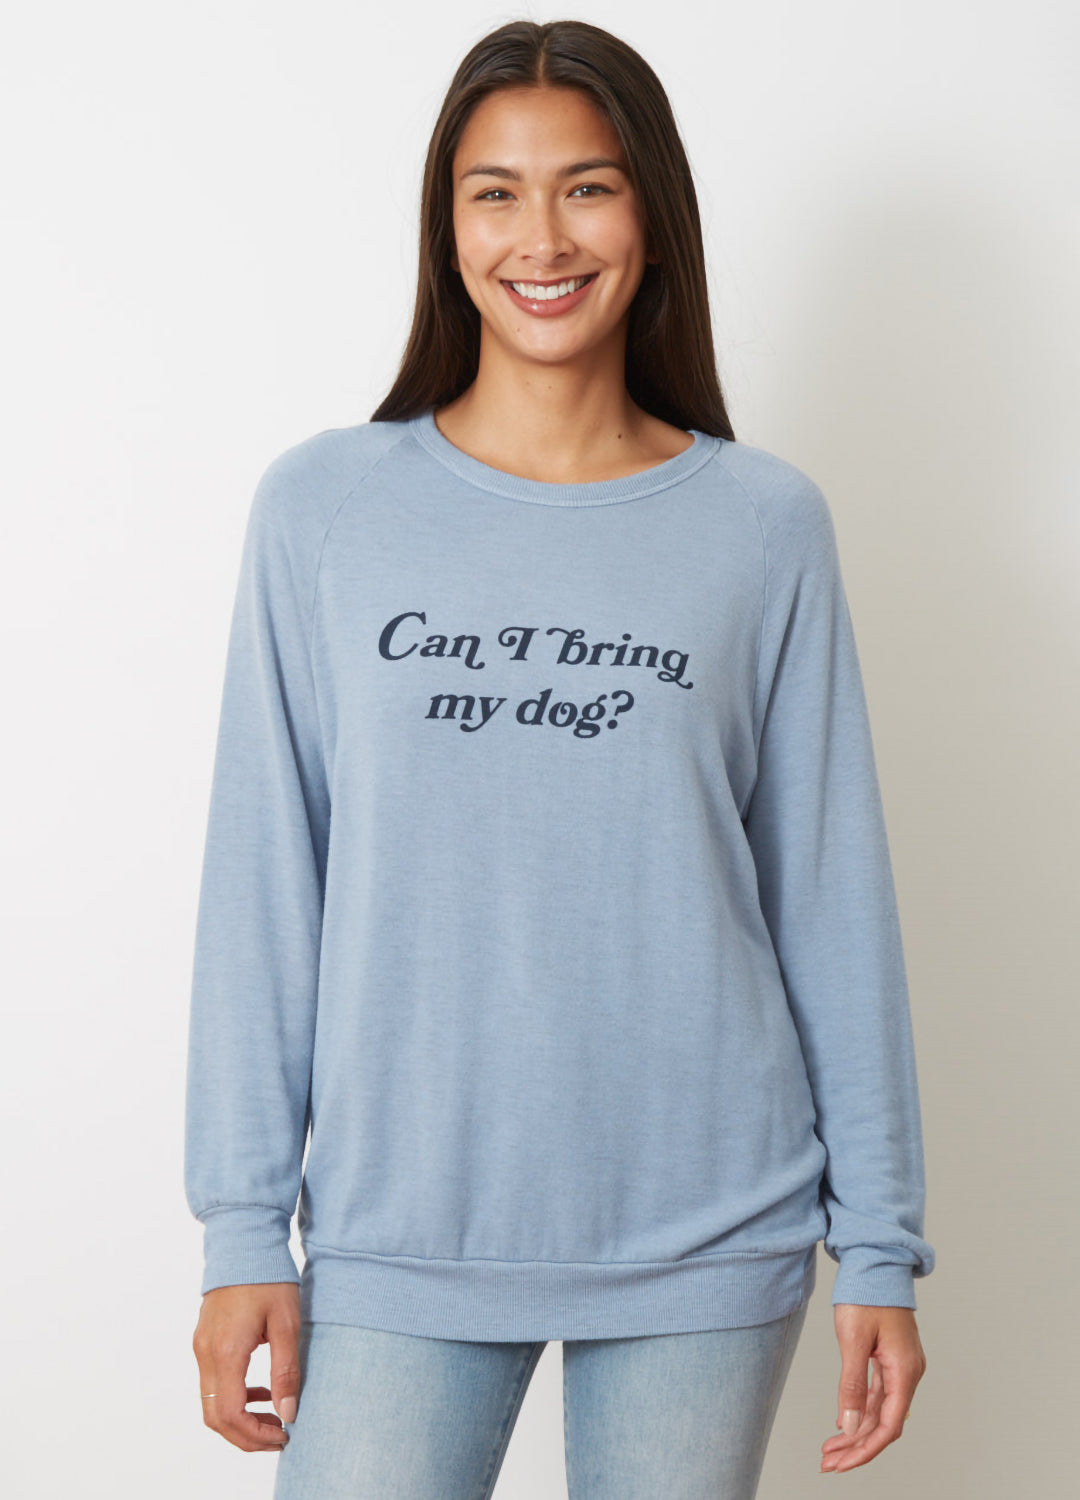 good hYOUman 'The Dave' sweatshirt top in light blue colour with 'Can I bring my dog?' lettering design in navy at Inner Beach Co, Toronto, Ontario, Canada